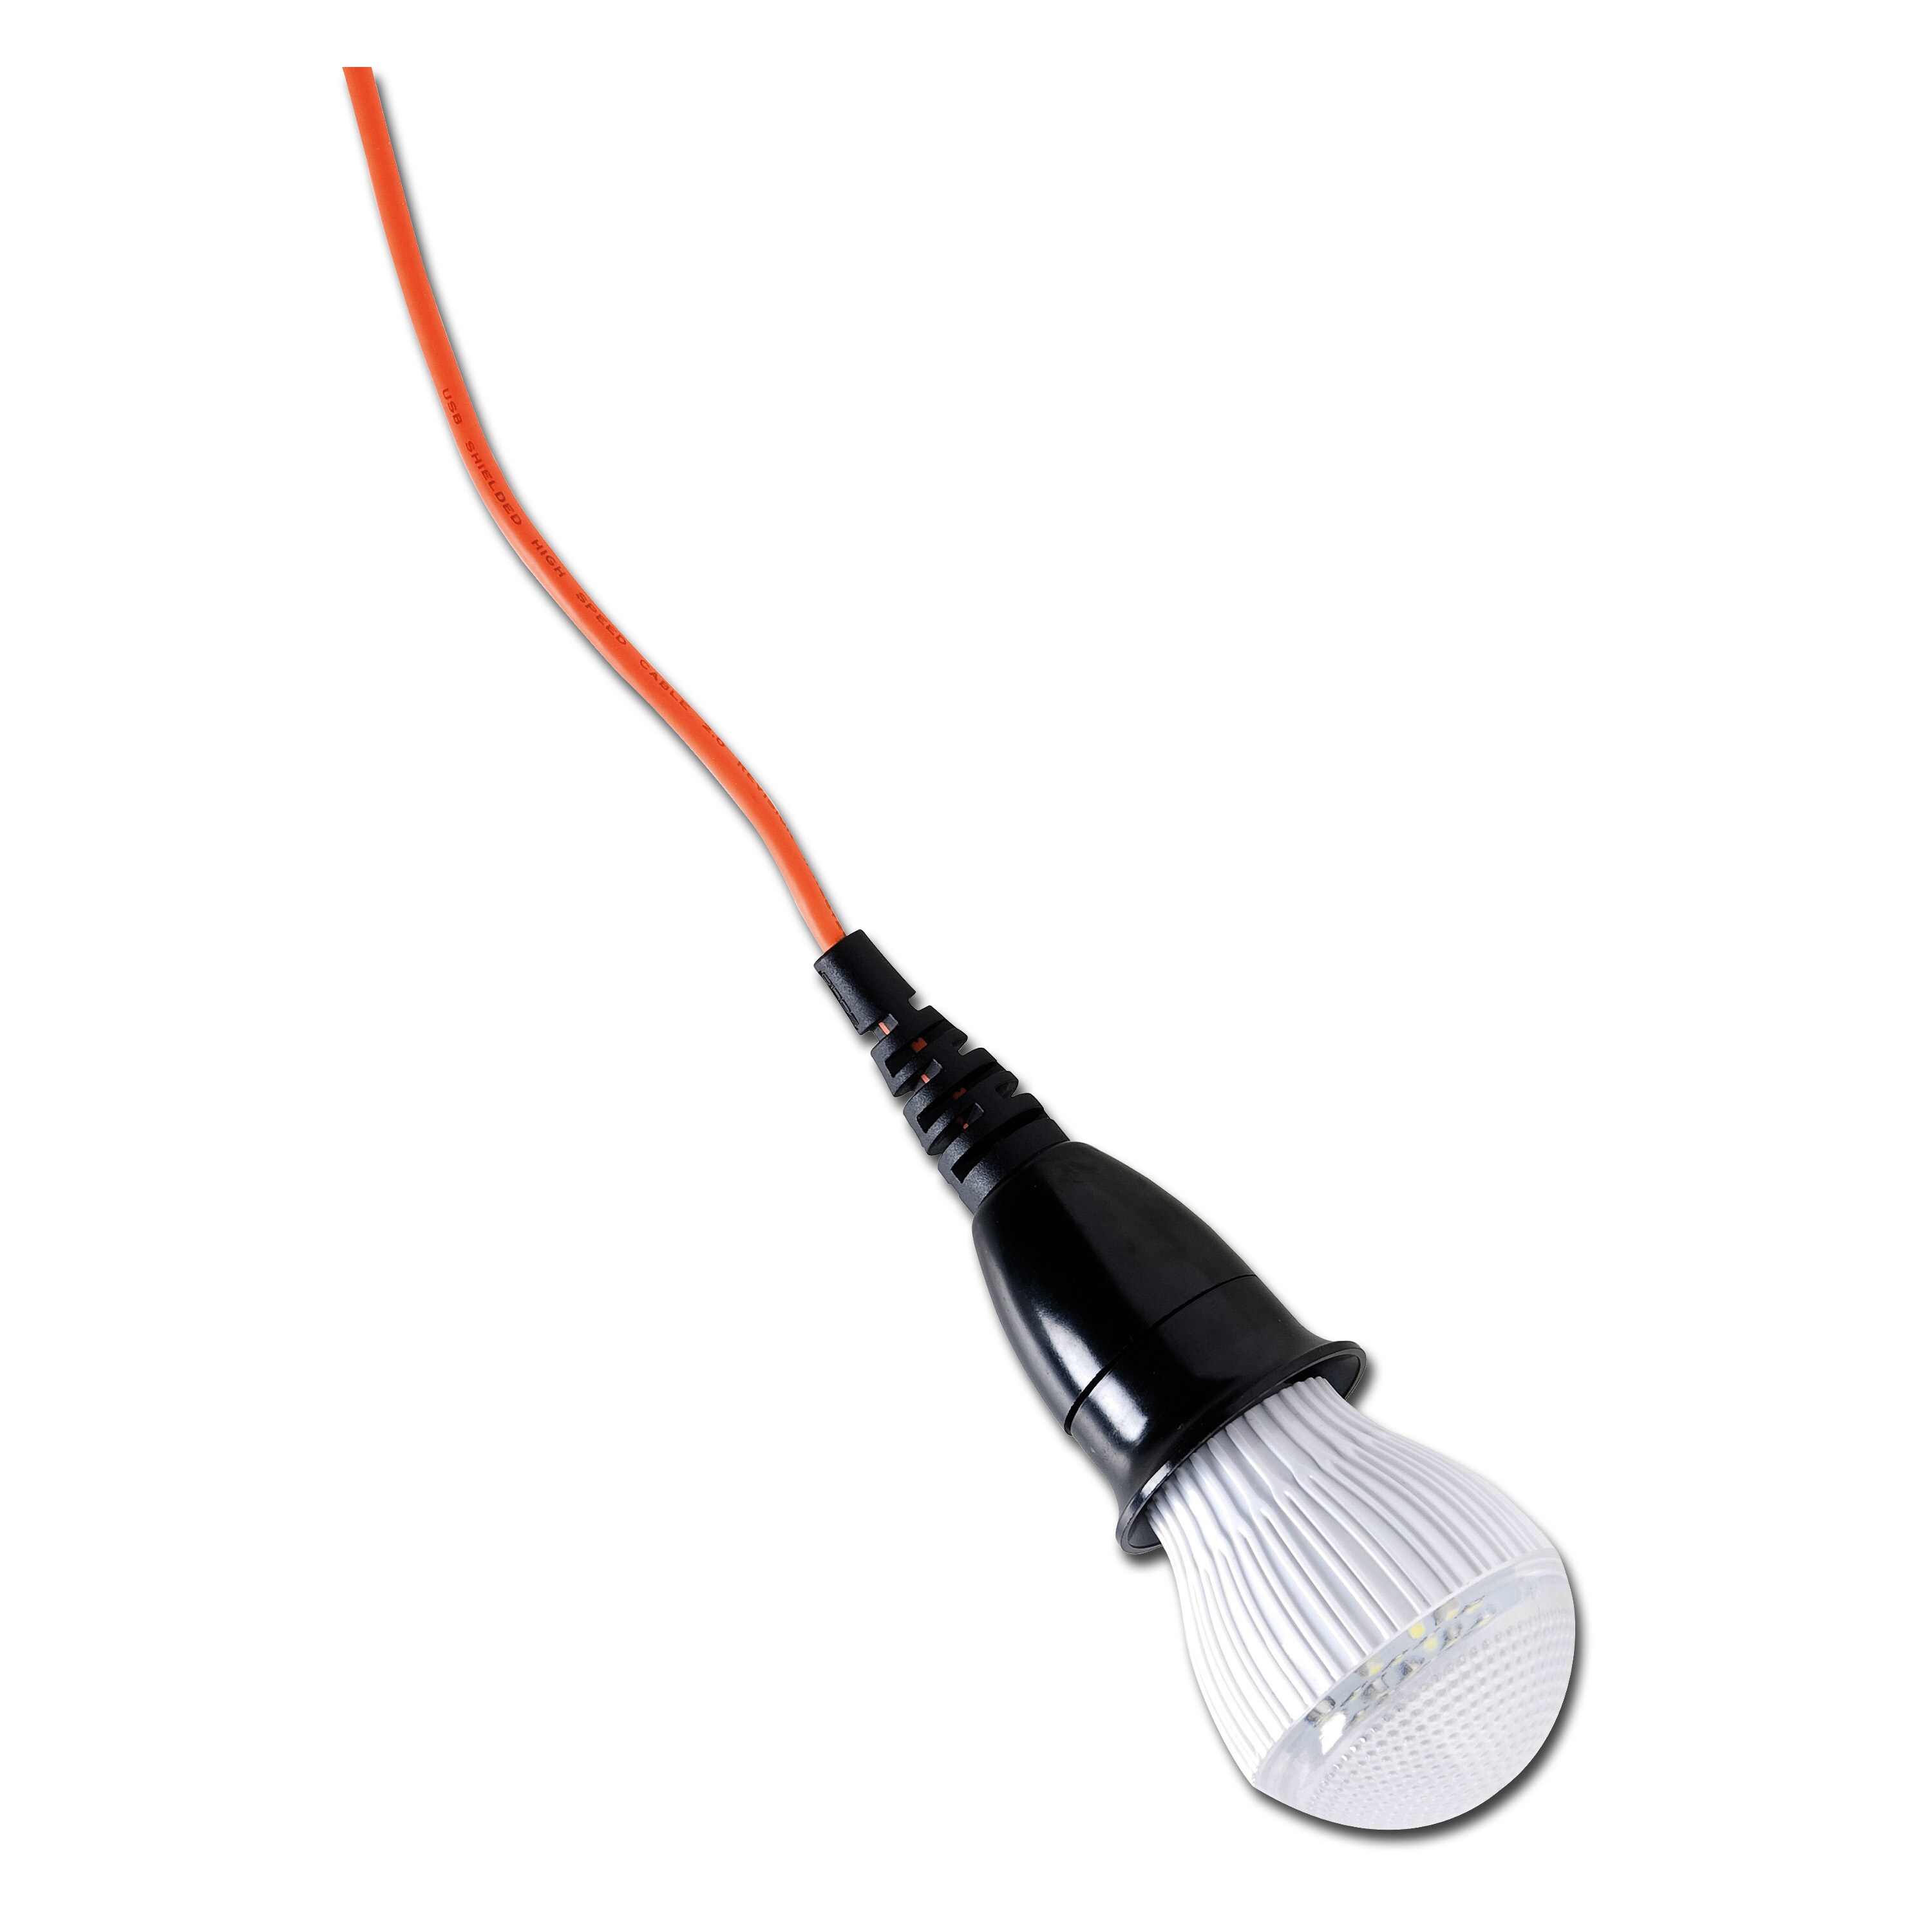 LED lamp Solio ALVA with USB-connection, LED lamp Solio ALVA with USB-connection, Lanterns, Lamps, Lighting